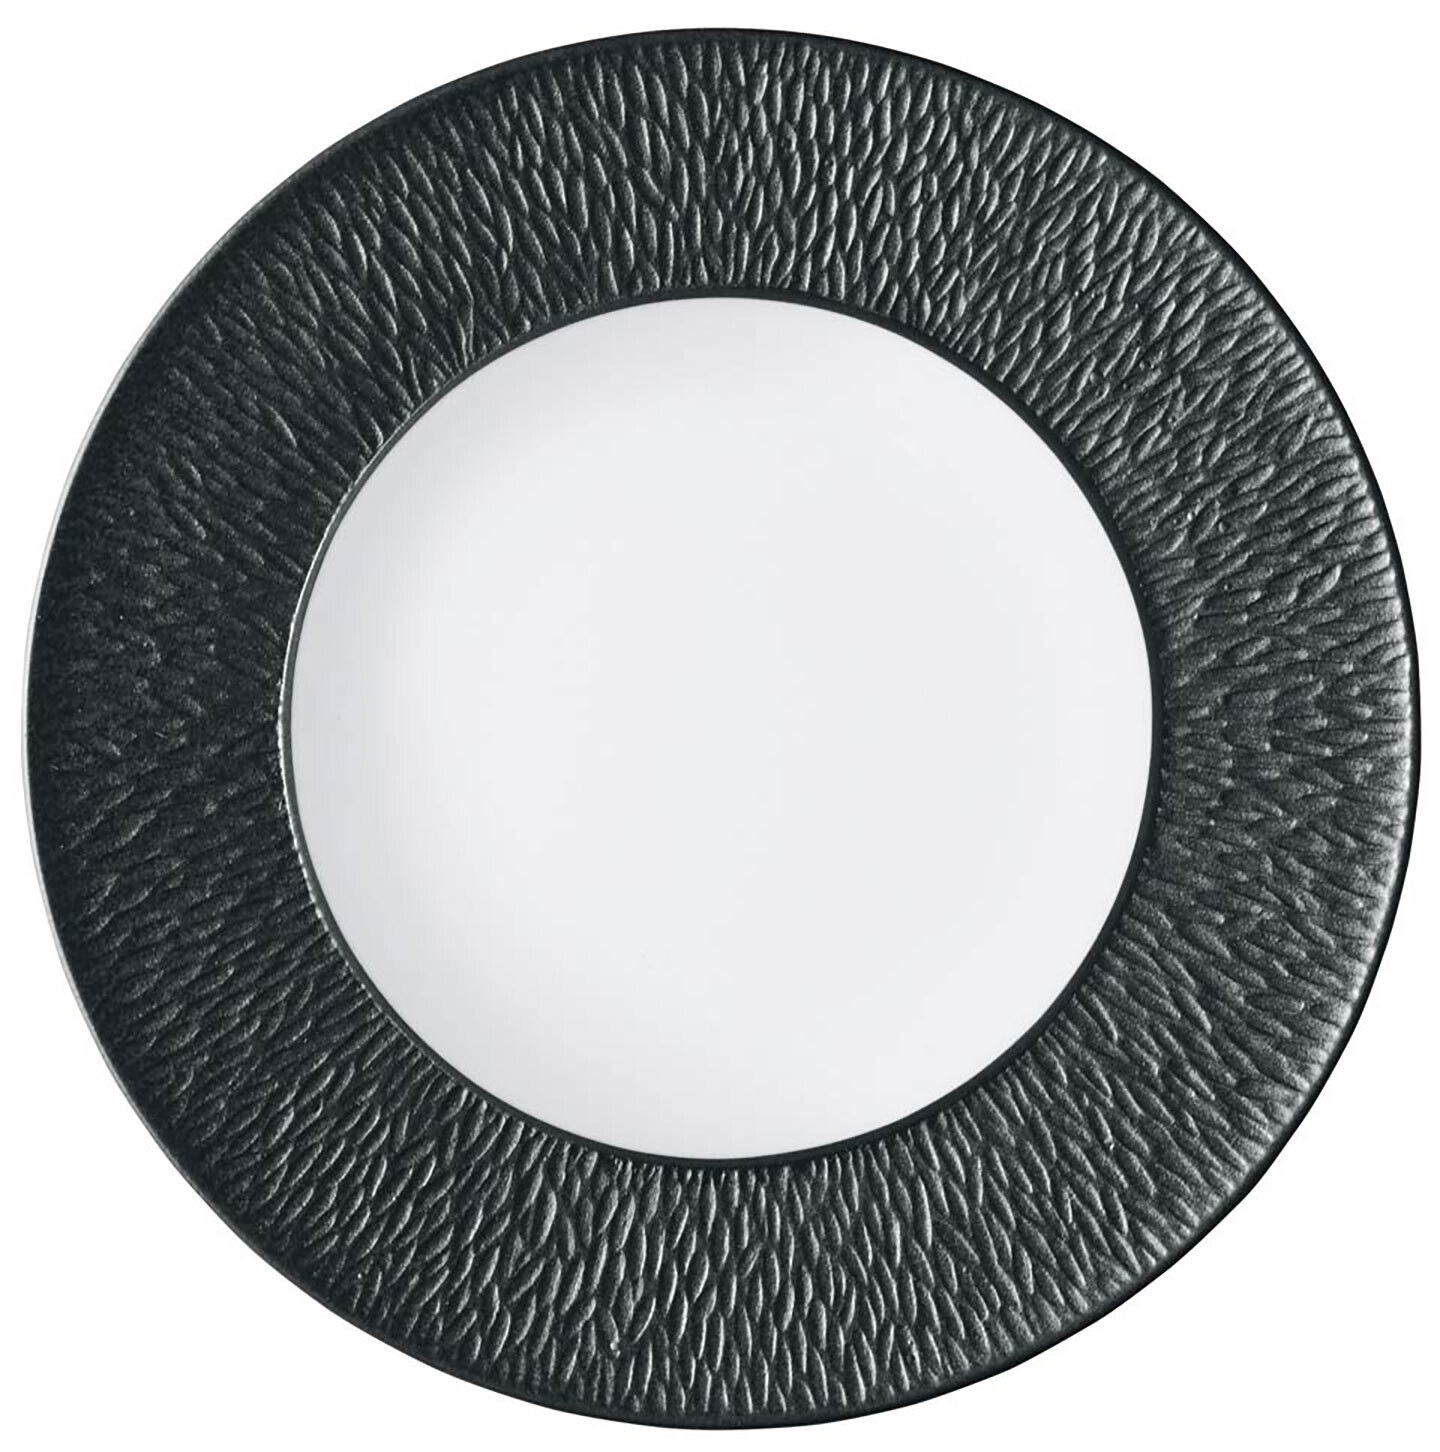 Raynaud Limoges Mineral Irise Mineral Irise Dore Deep plate with engraved rim 10.6 in 0825-23-250027